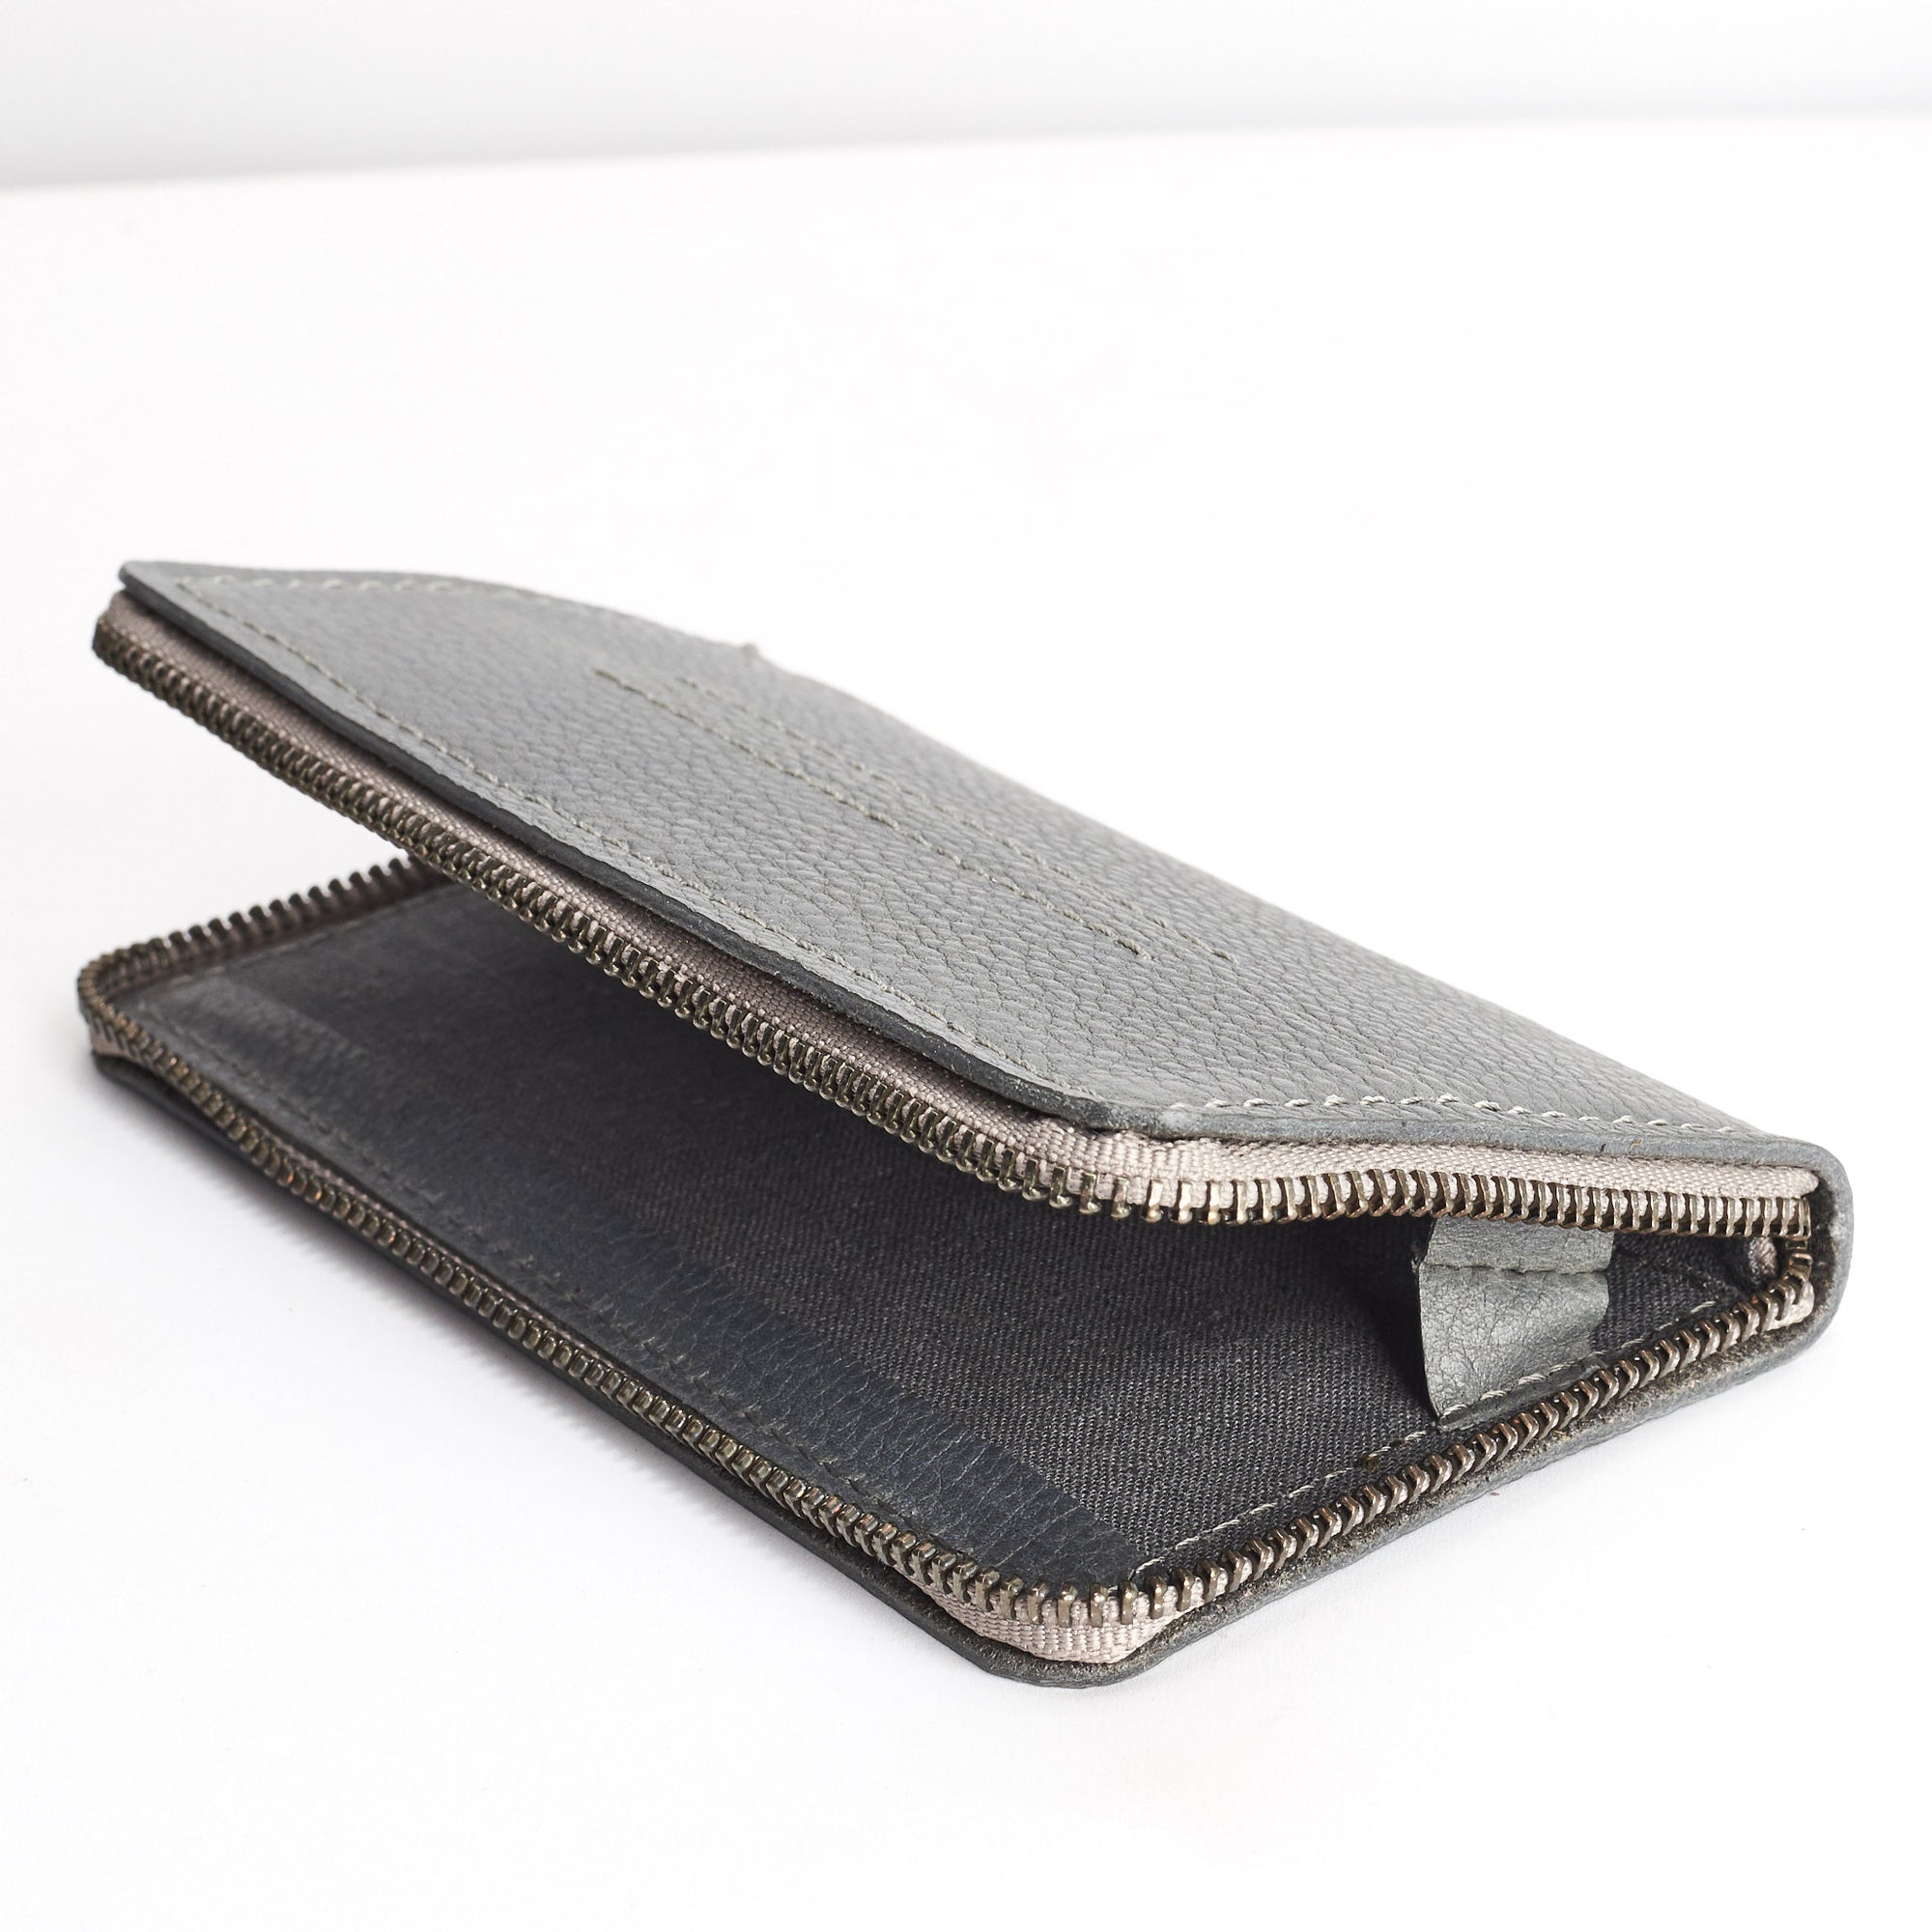 Linen interior detail. Grey iPhone leather wallet stand case for mens gifts. iPhone x, iPhone 10, iPhone 8 plus leather stand sleeve